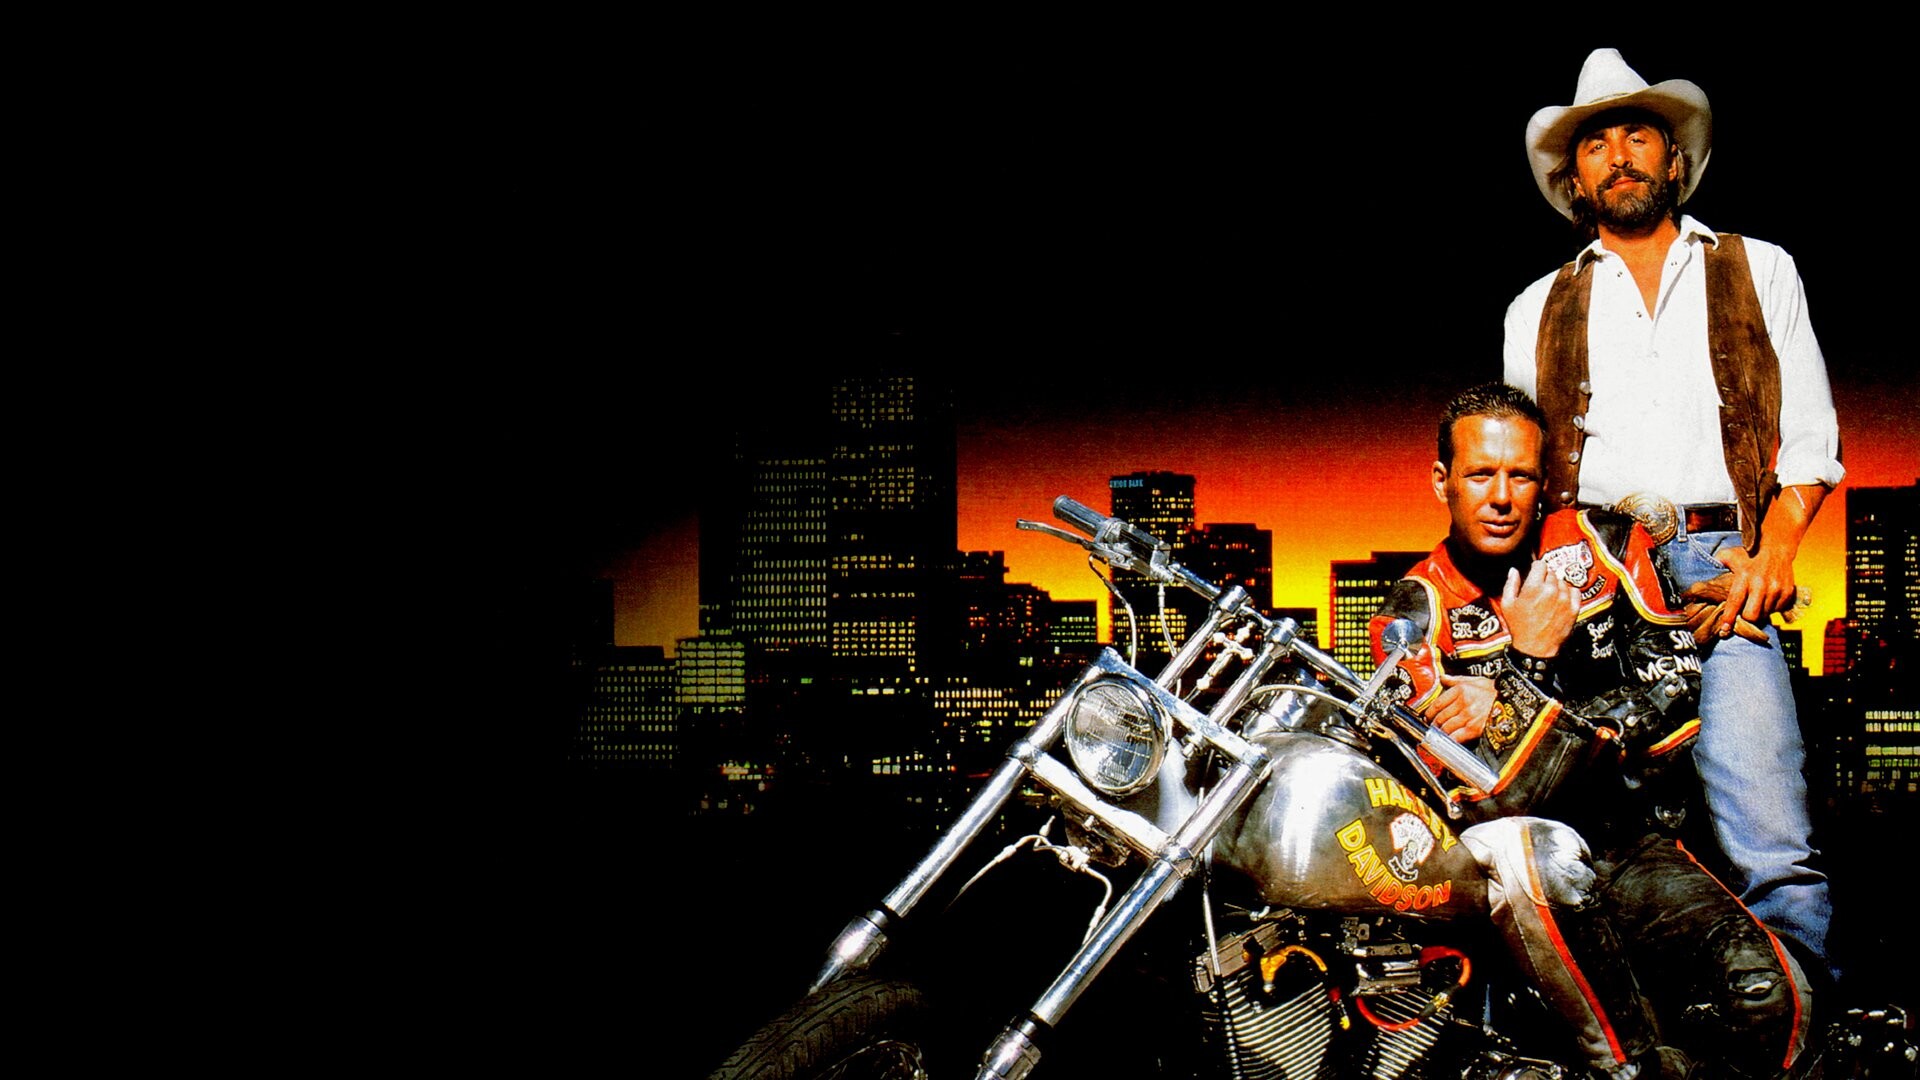 Harley Davidson and the Marlboro Man: A screenplay by Don Michael Paul, An action movie, Mickey Rourke, A tough biker, Harley motorcycle. 1920x1080 Full HD Background.